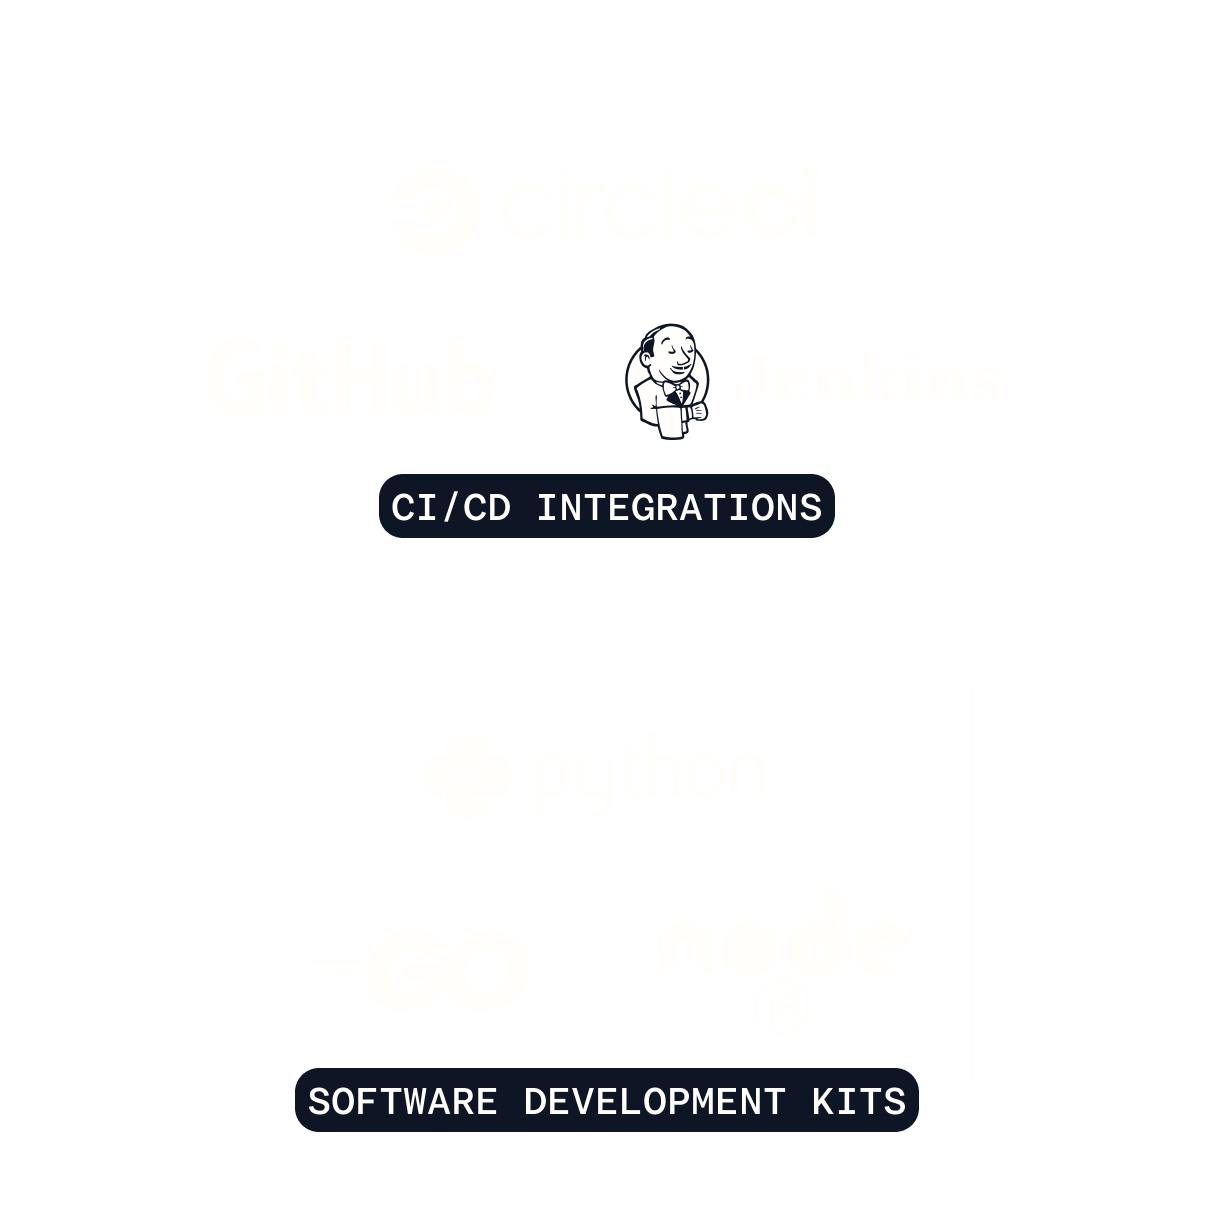 List of 1Password CI/CD integrations, including CircleCI, GitHub, and Jenkins, and SDK integrations, including Python, Go, and Node.js.